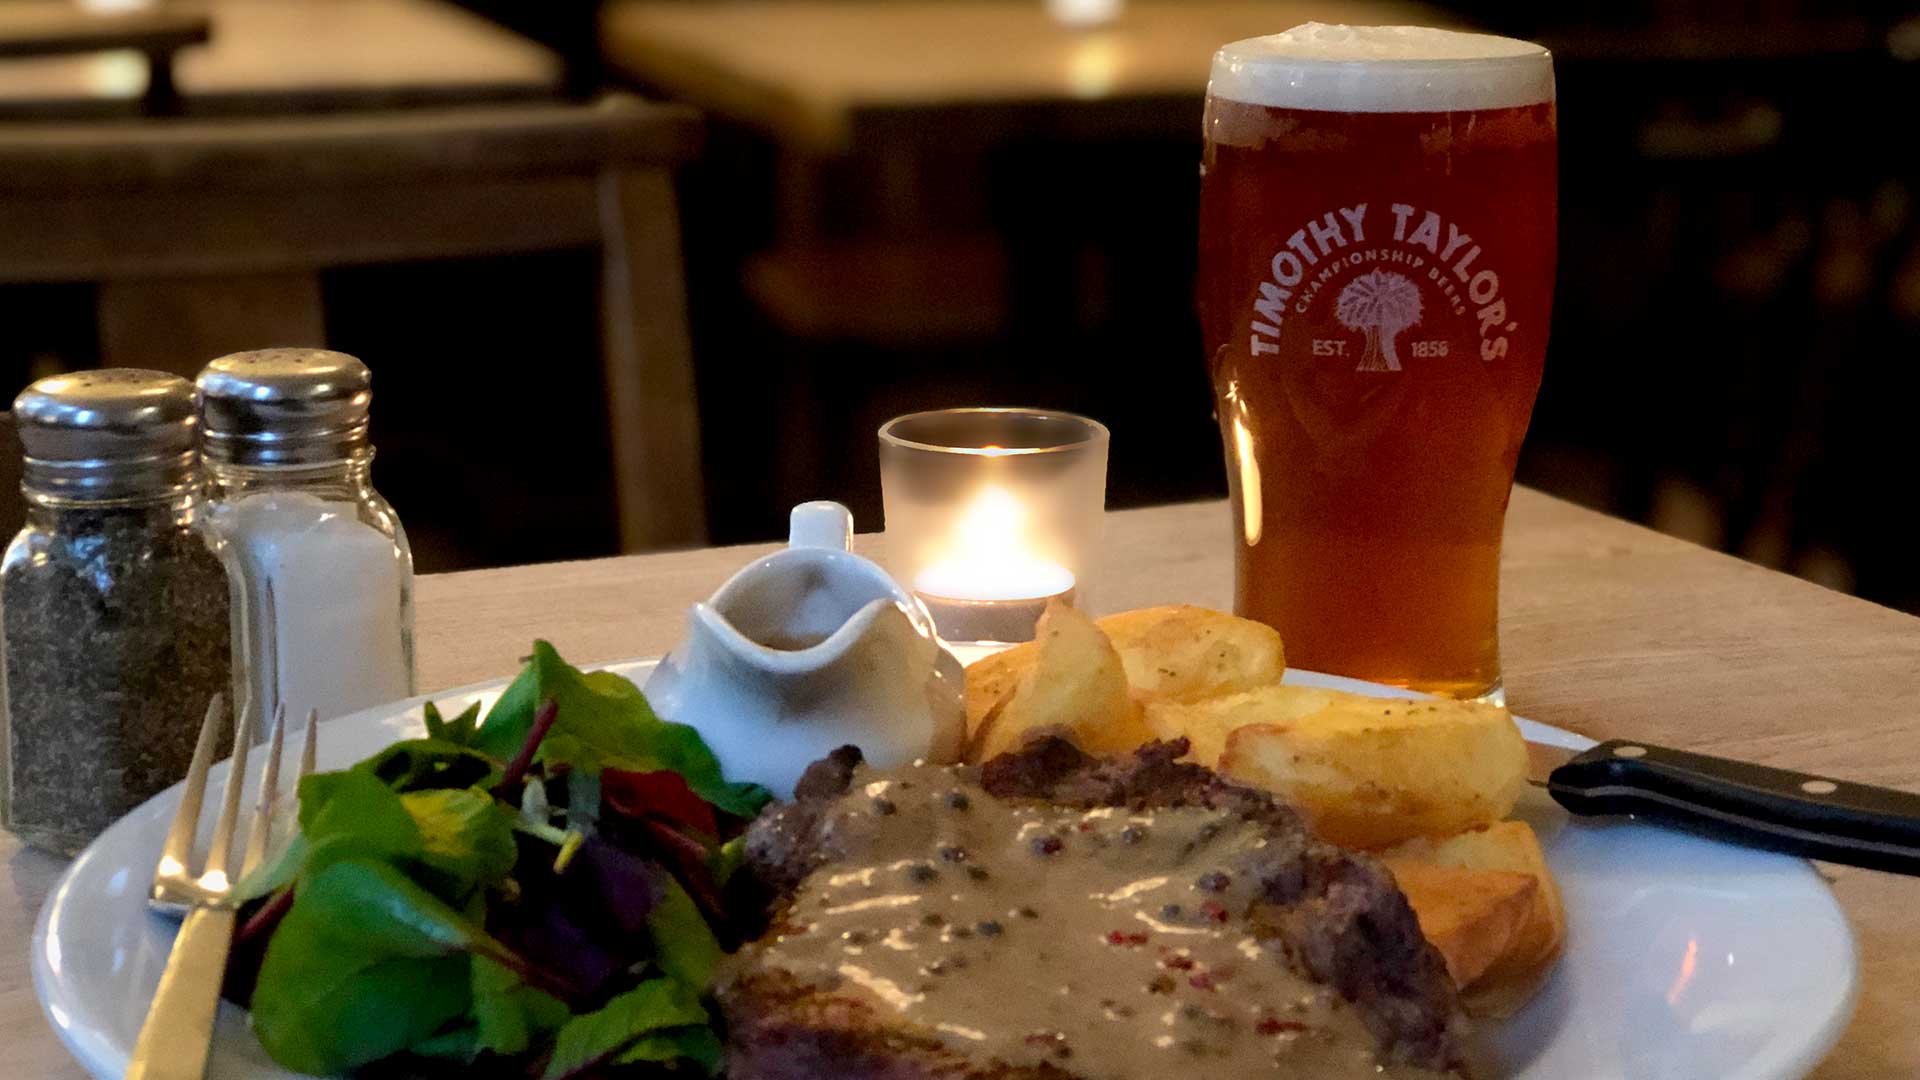 Steak and chips with a pint of Timothy Taylor Landlord at The Harrison Pub Kings Cross